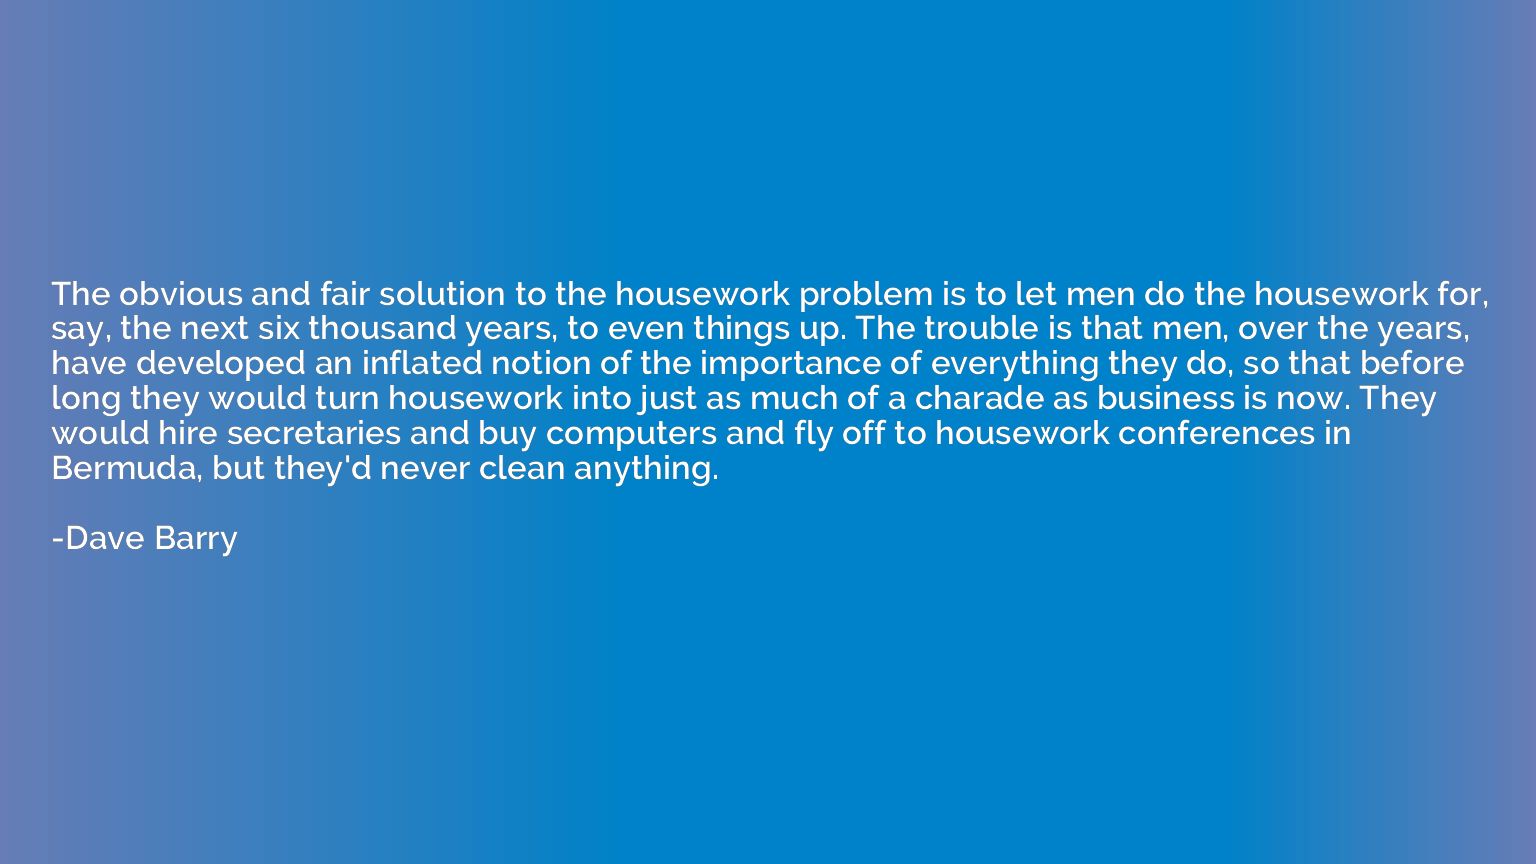 The obvious and fair solution to the housework problem is to